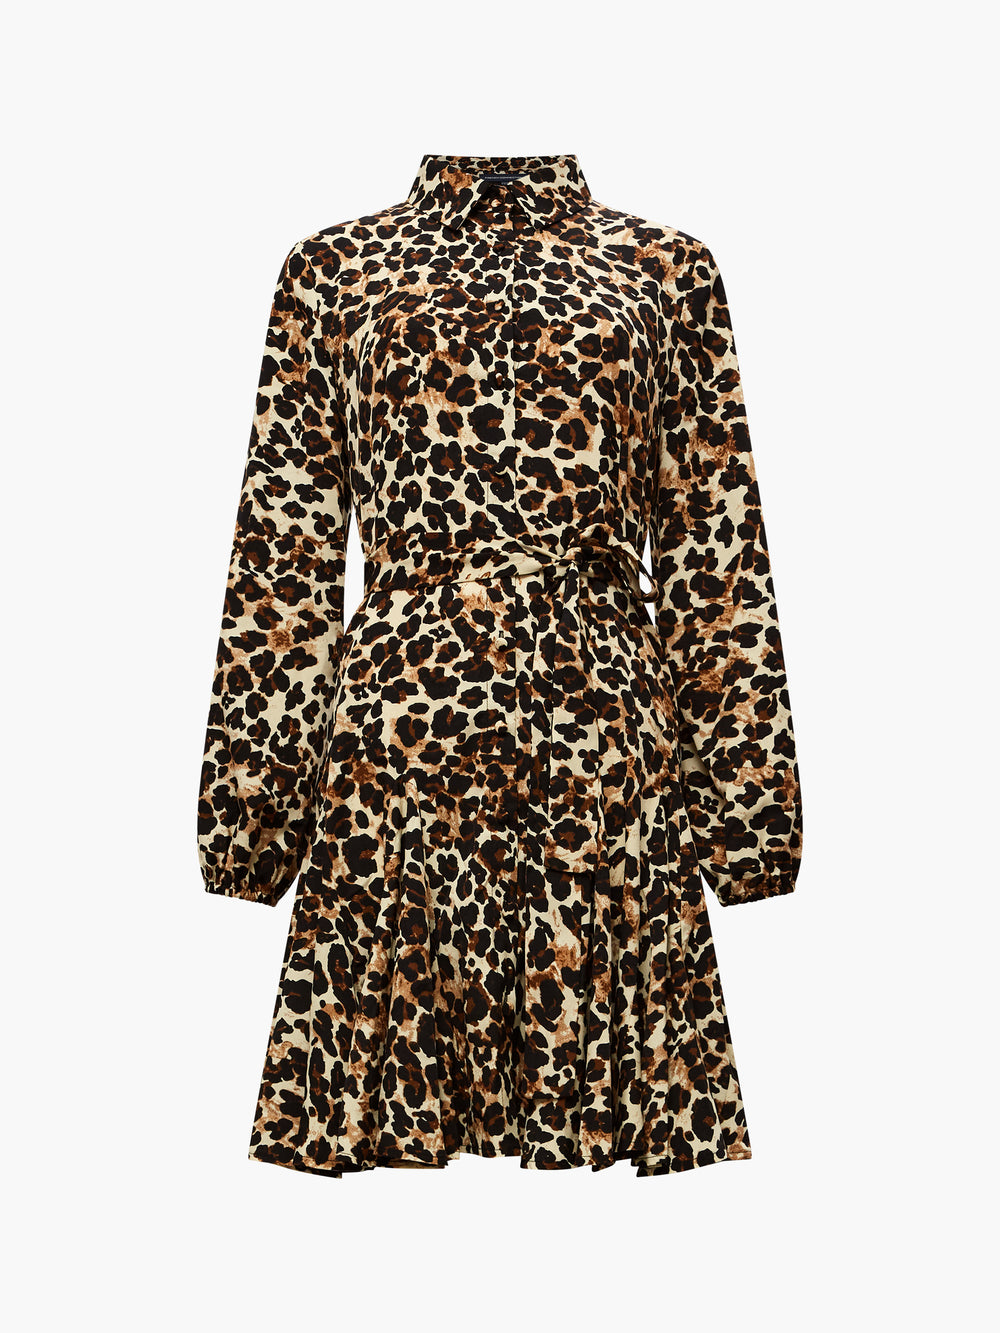 Leopard Print Belted Shirt Mini Dress Leopard Multi | French Connection UK